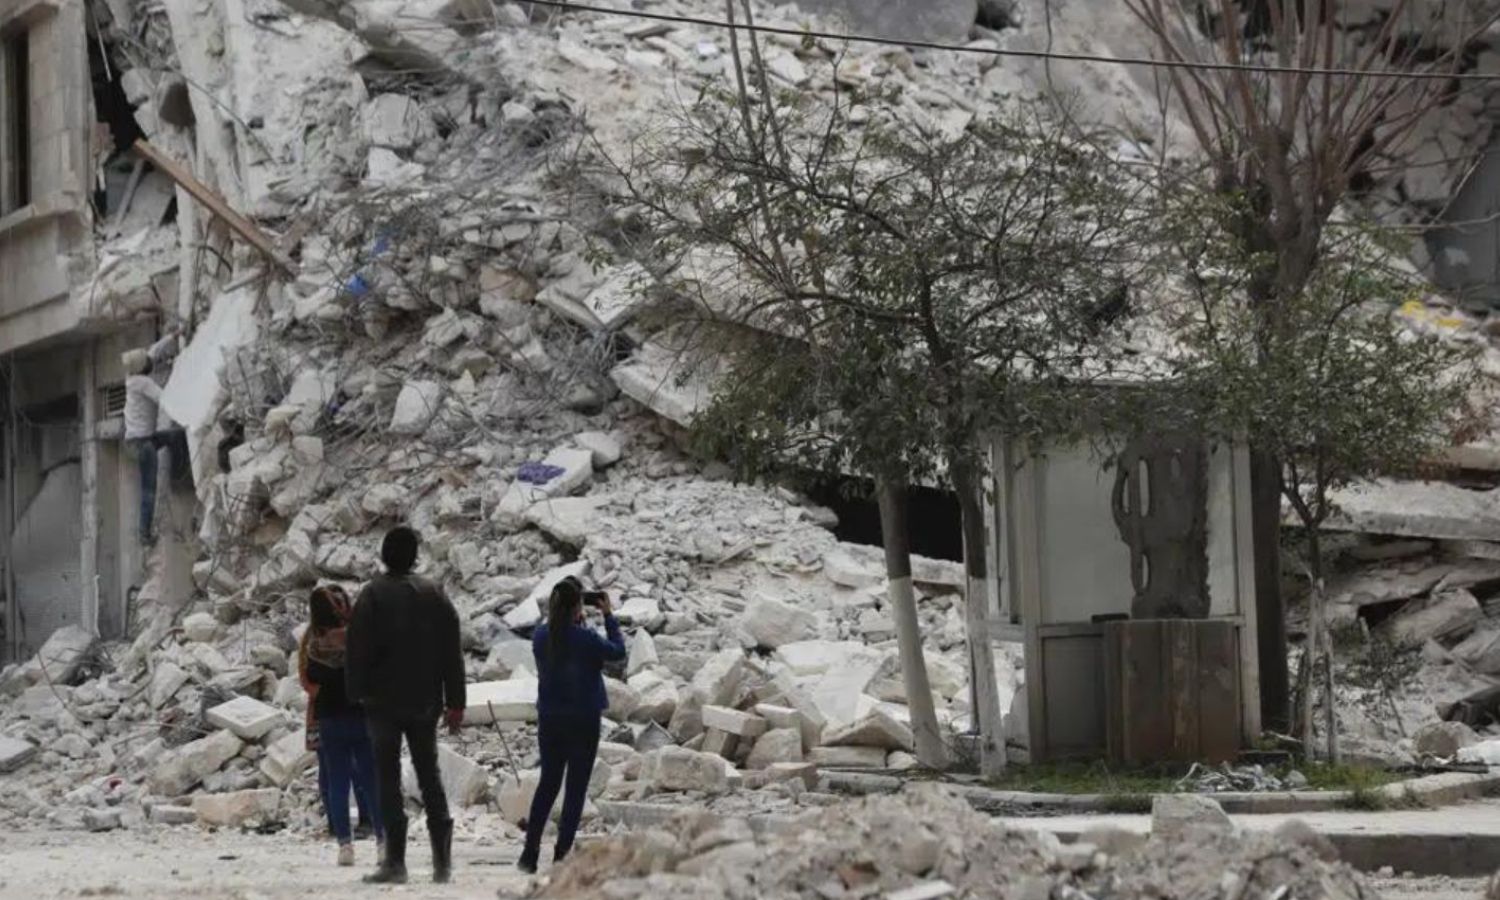 People standing near a quake-destroyed building in northern Aleppo city - February 27, 2023 (AP)